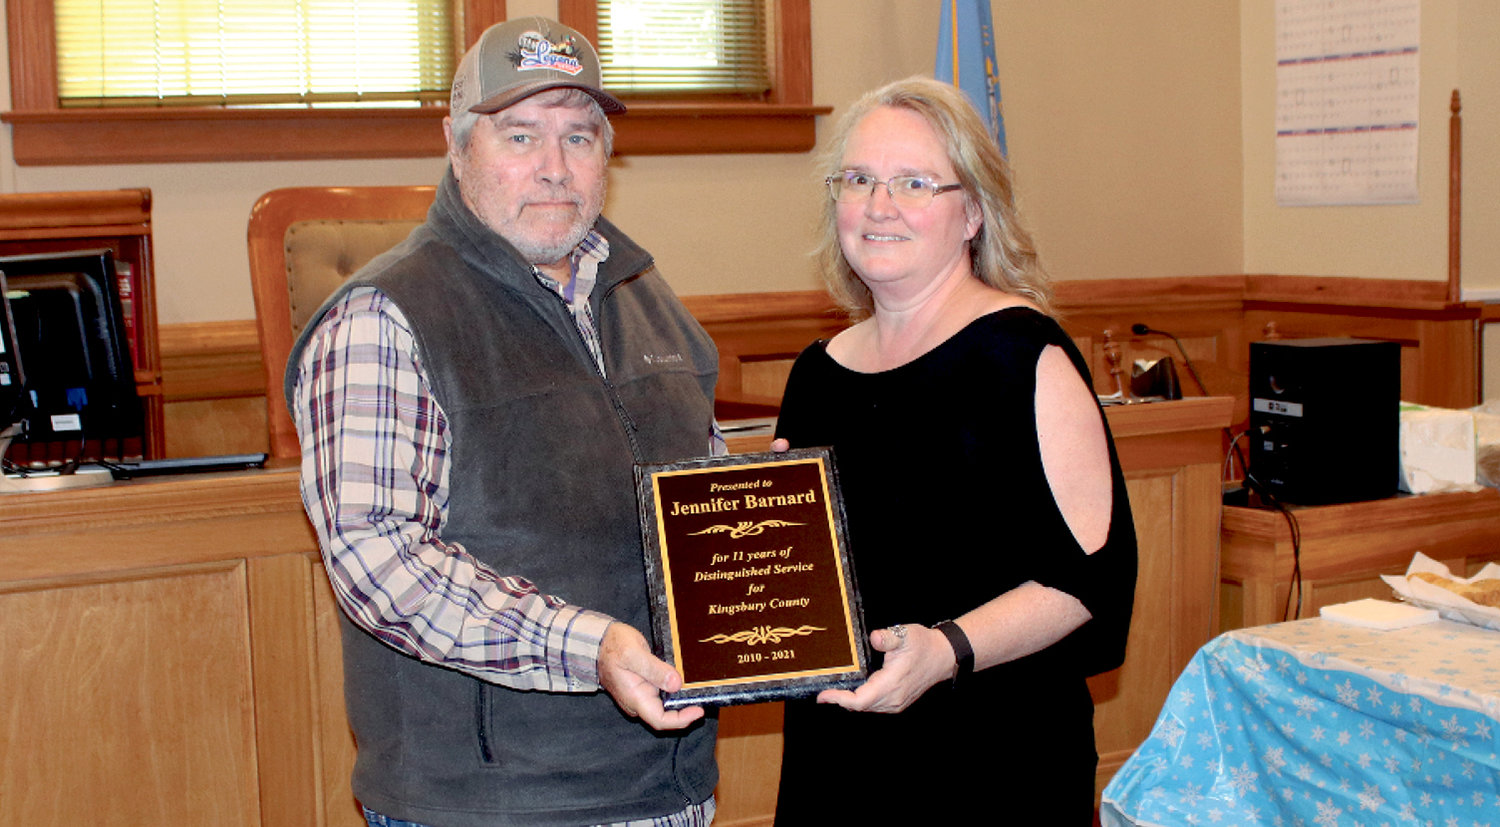 KIngsbury County Commission Chair Roger Walls presents Jennifer Barnard with a plaque for her 11 years of service as a county employee, most recently as Kingsbury County Auditor.